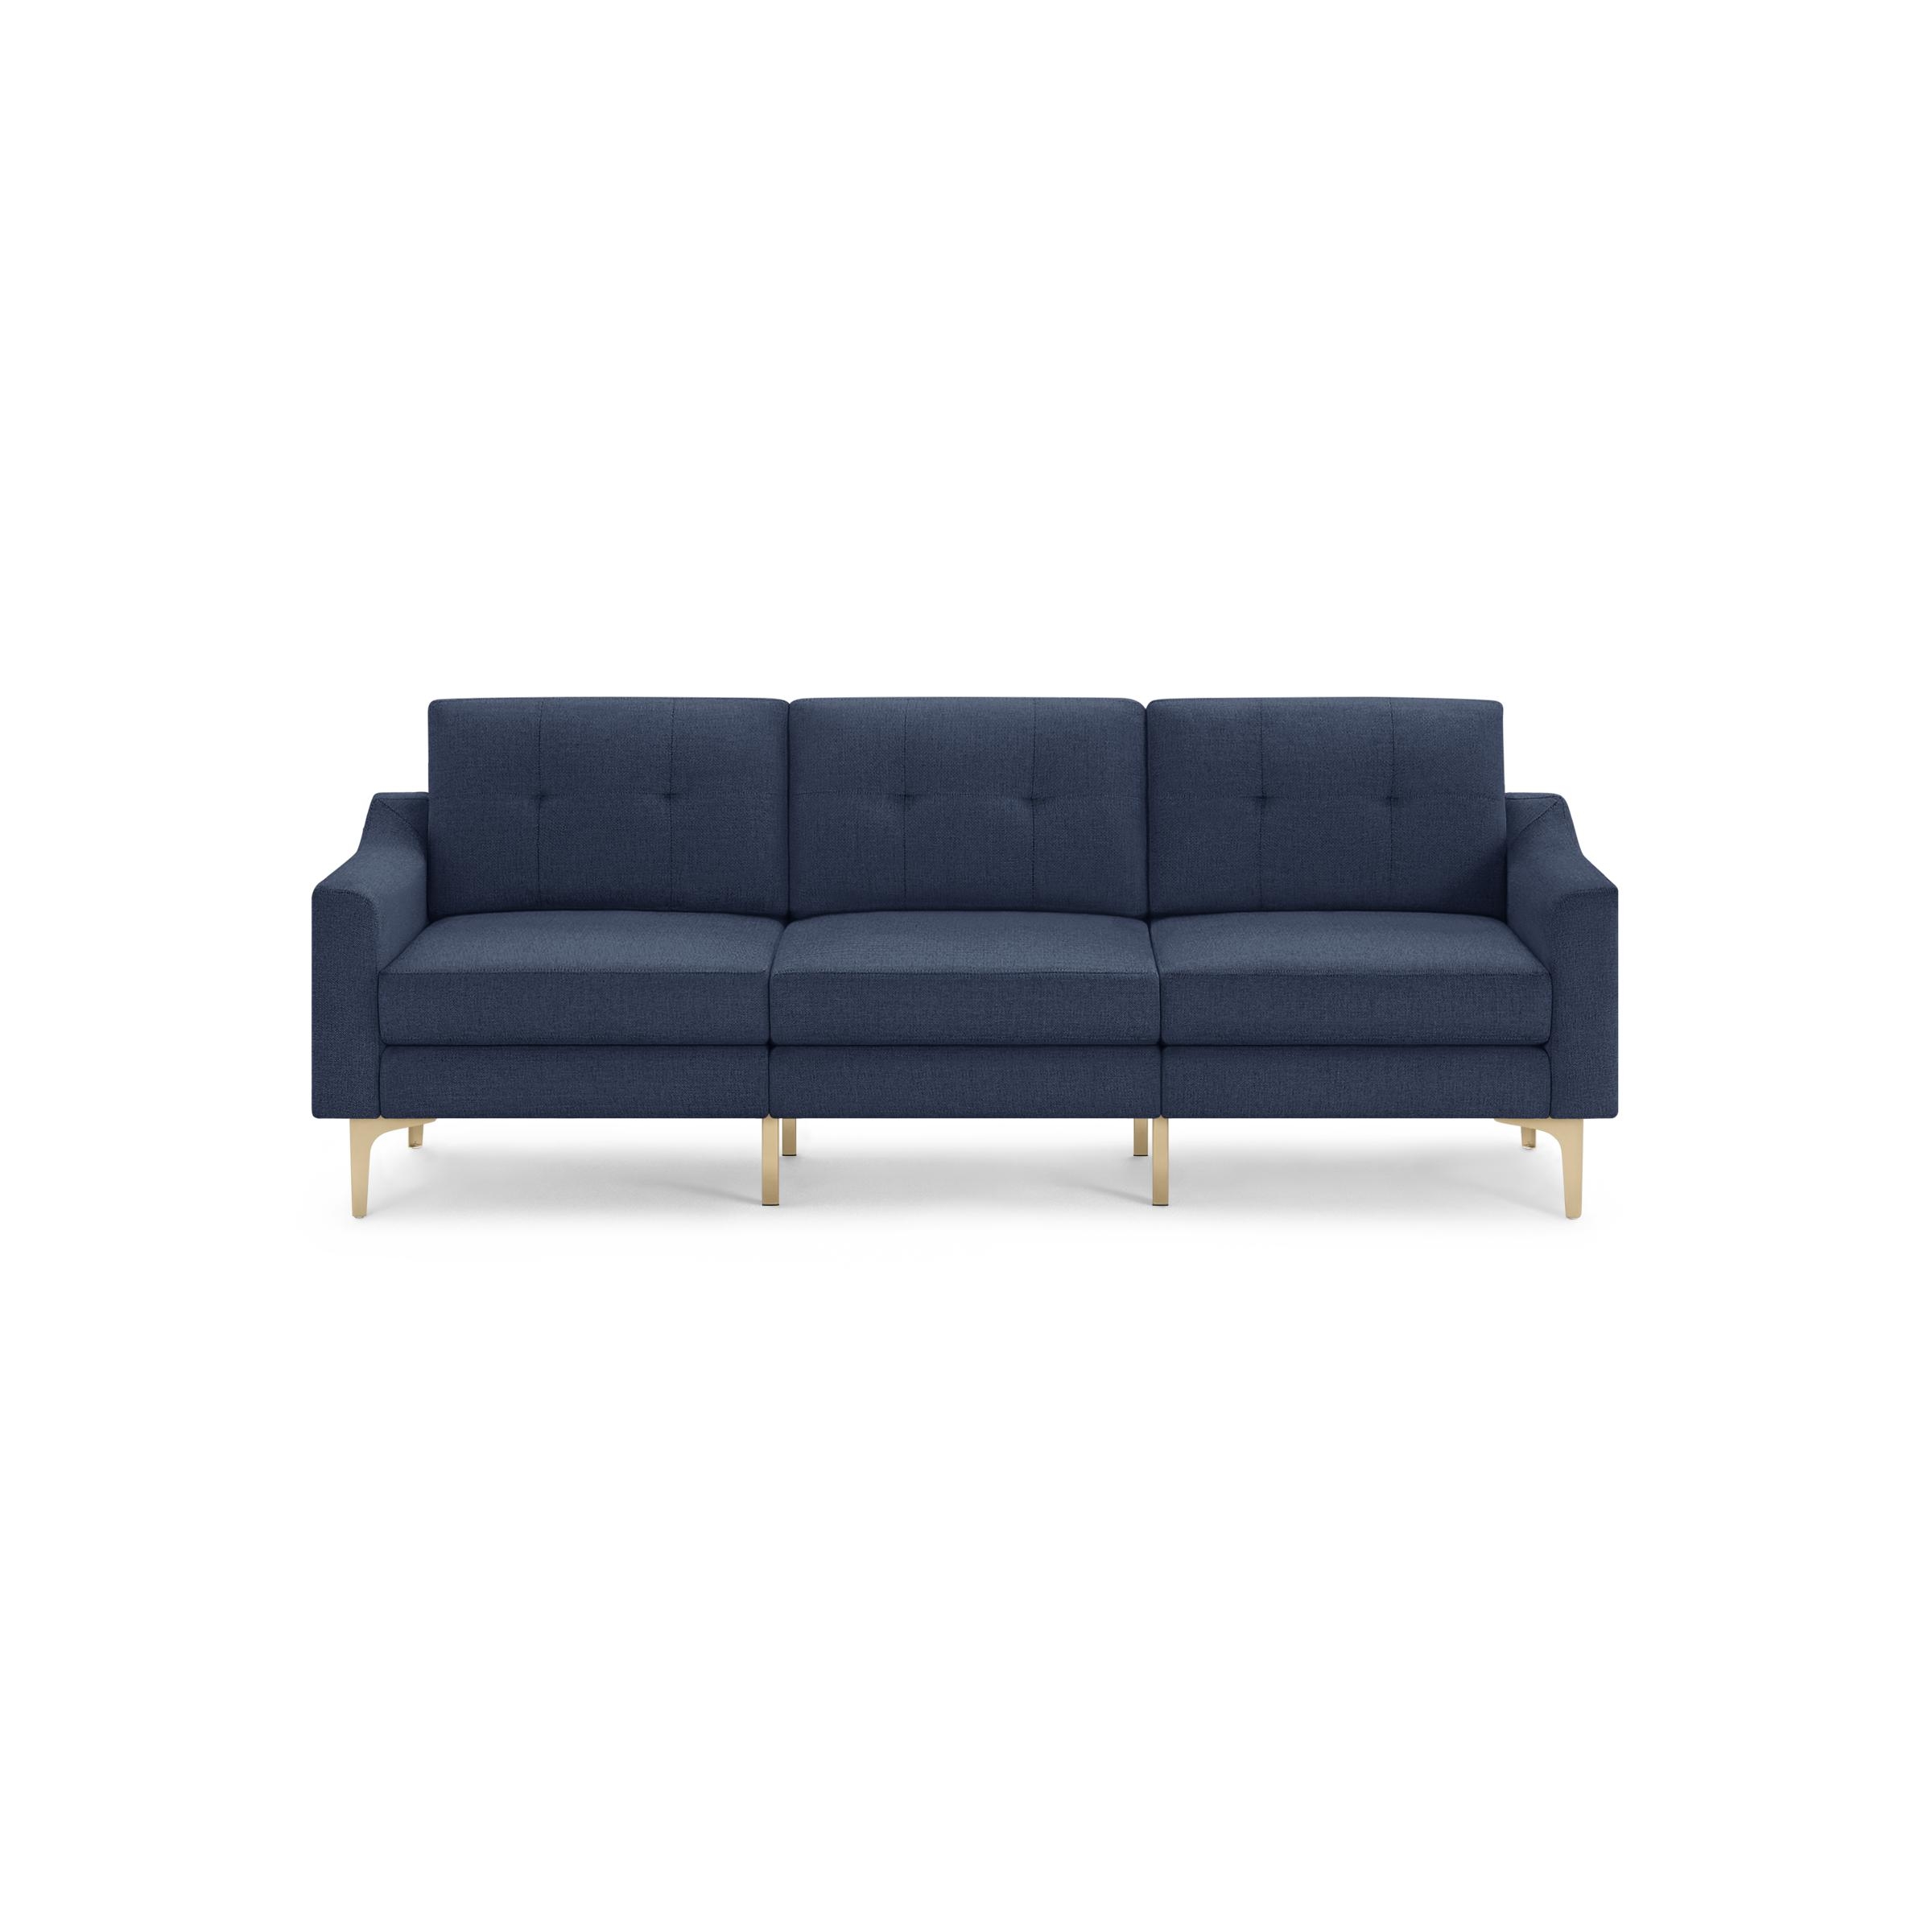 Nomad Sofa in Navy Blue, Brass Legs - Image 0